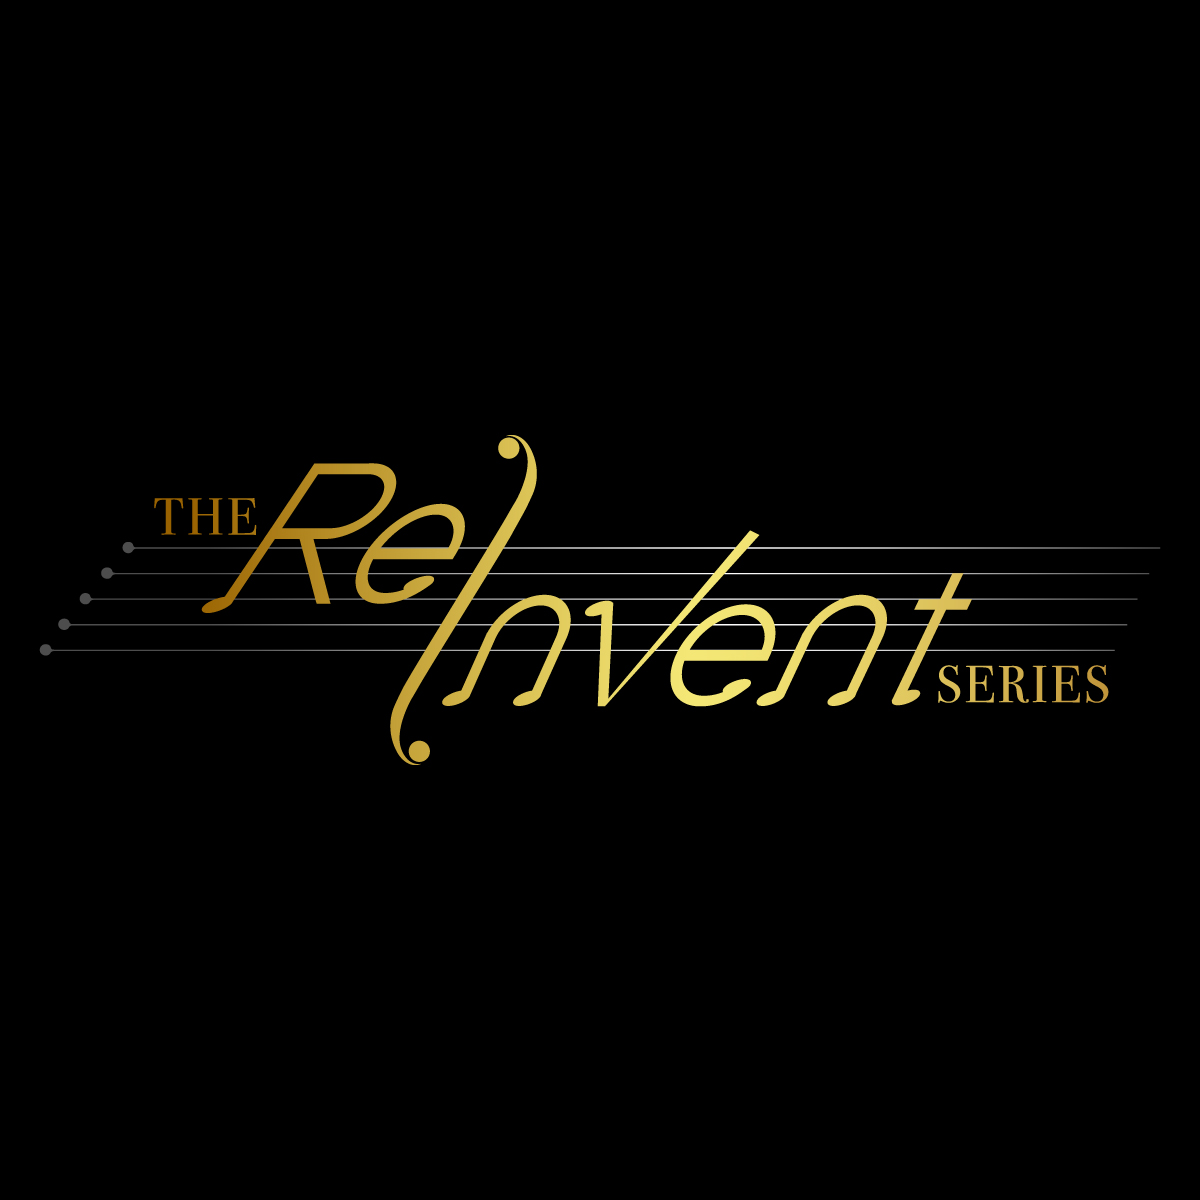 Get ready to experience a new era in classical #music! The stage is set, the #musicians are ready & something extraordinary is about to unfold. Prepare to be captivated with #TheReInventSeries

Stay tuned for a big announcement!

@expocitydubai @arrahman
#FirdausOrchestra #Teaser